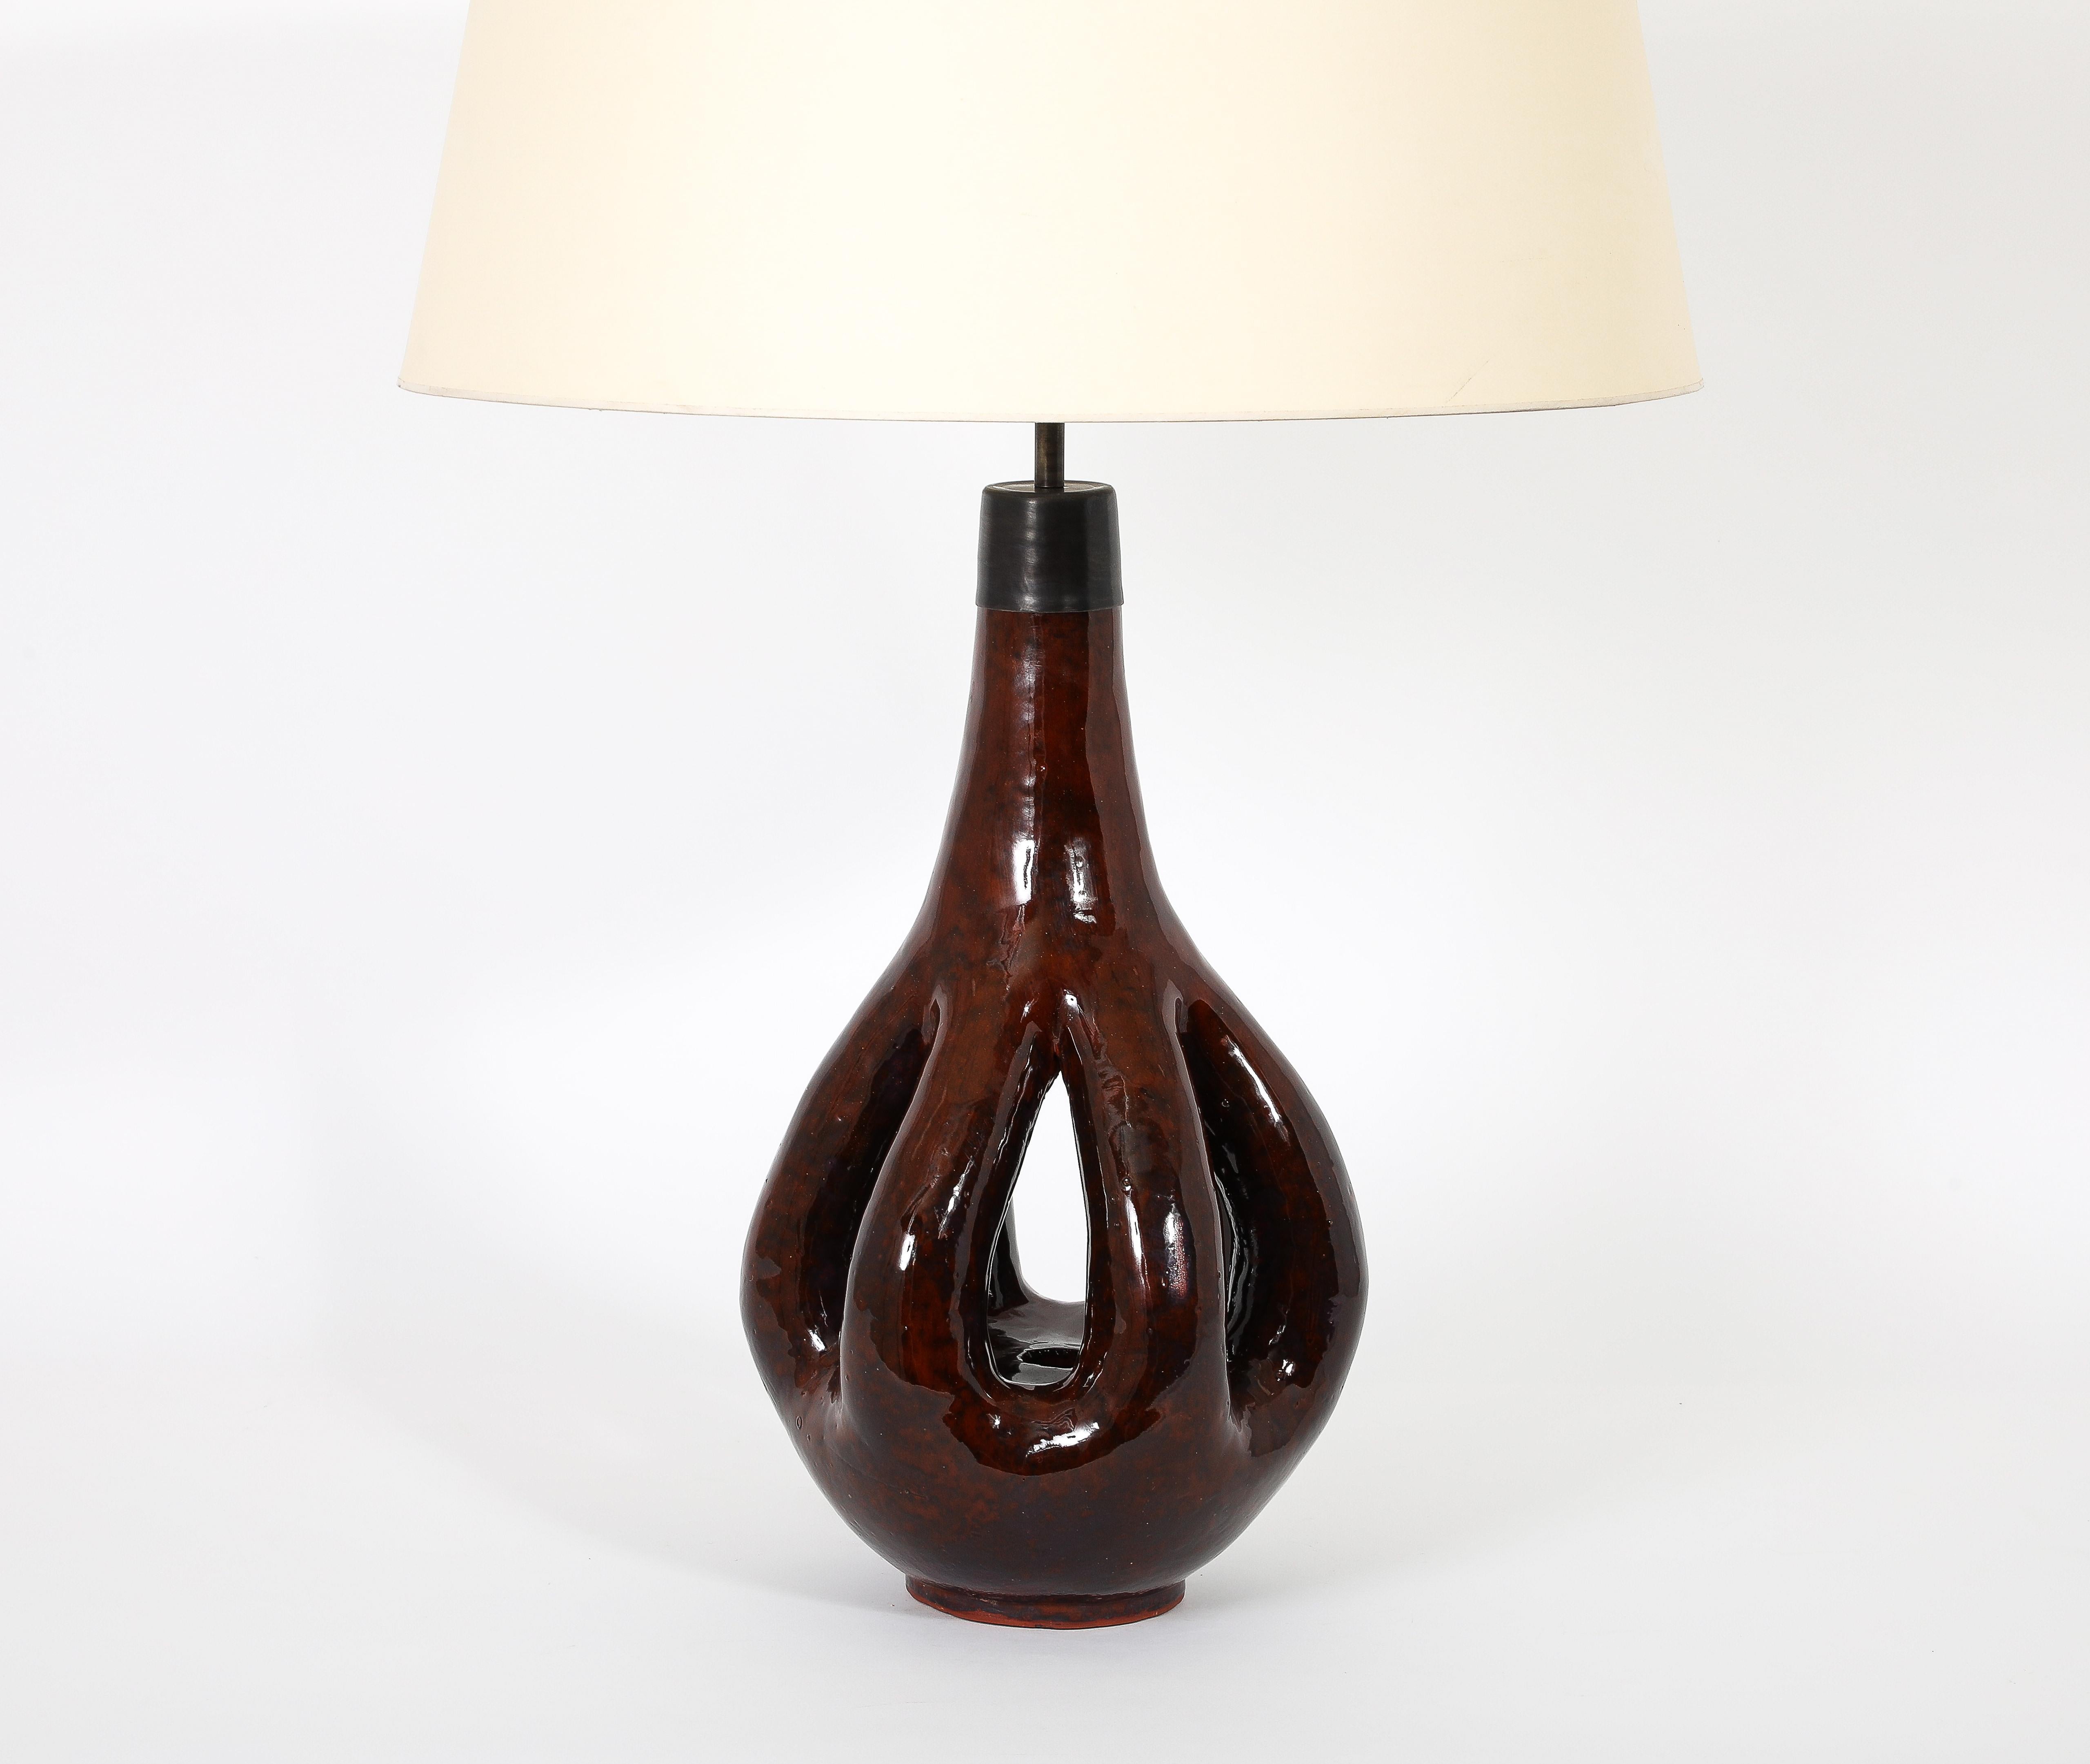 Large Ceramic lamp, an interesting organic design with a deep brown glaze.
Bronze hardware.

Base only 11x23